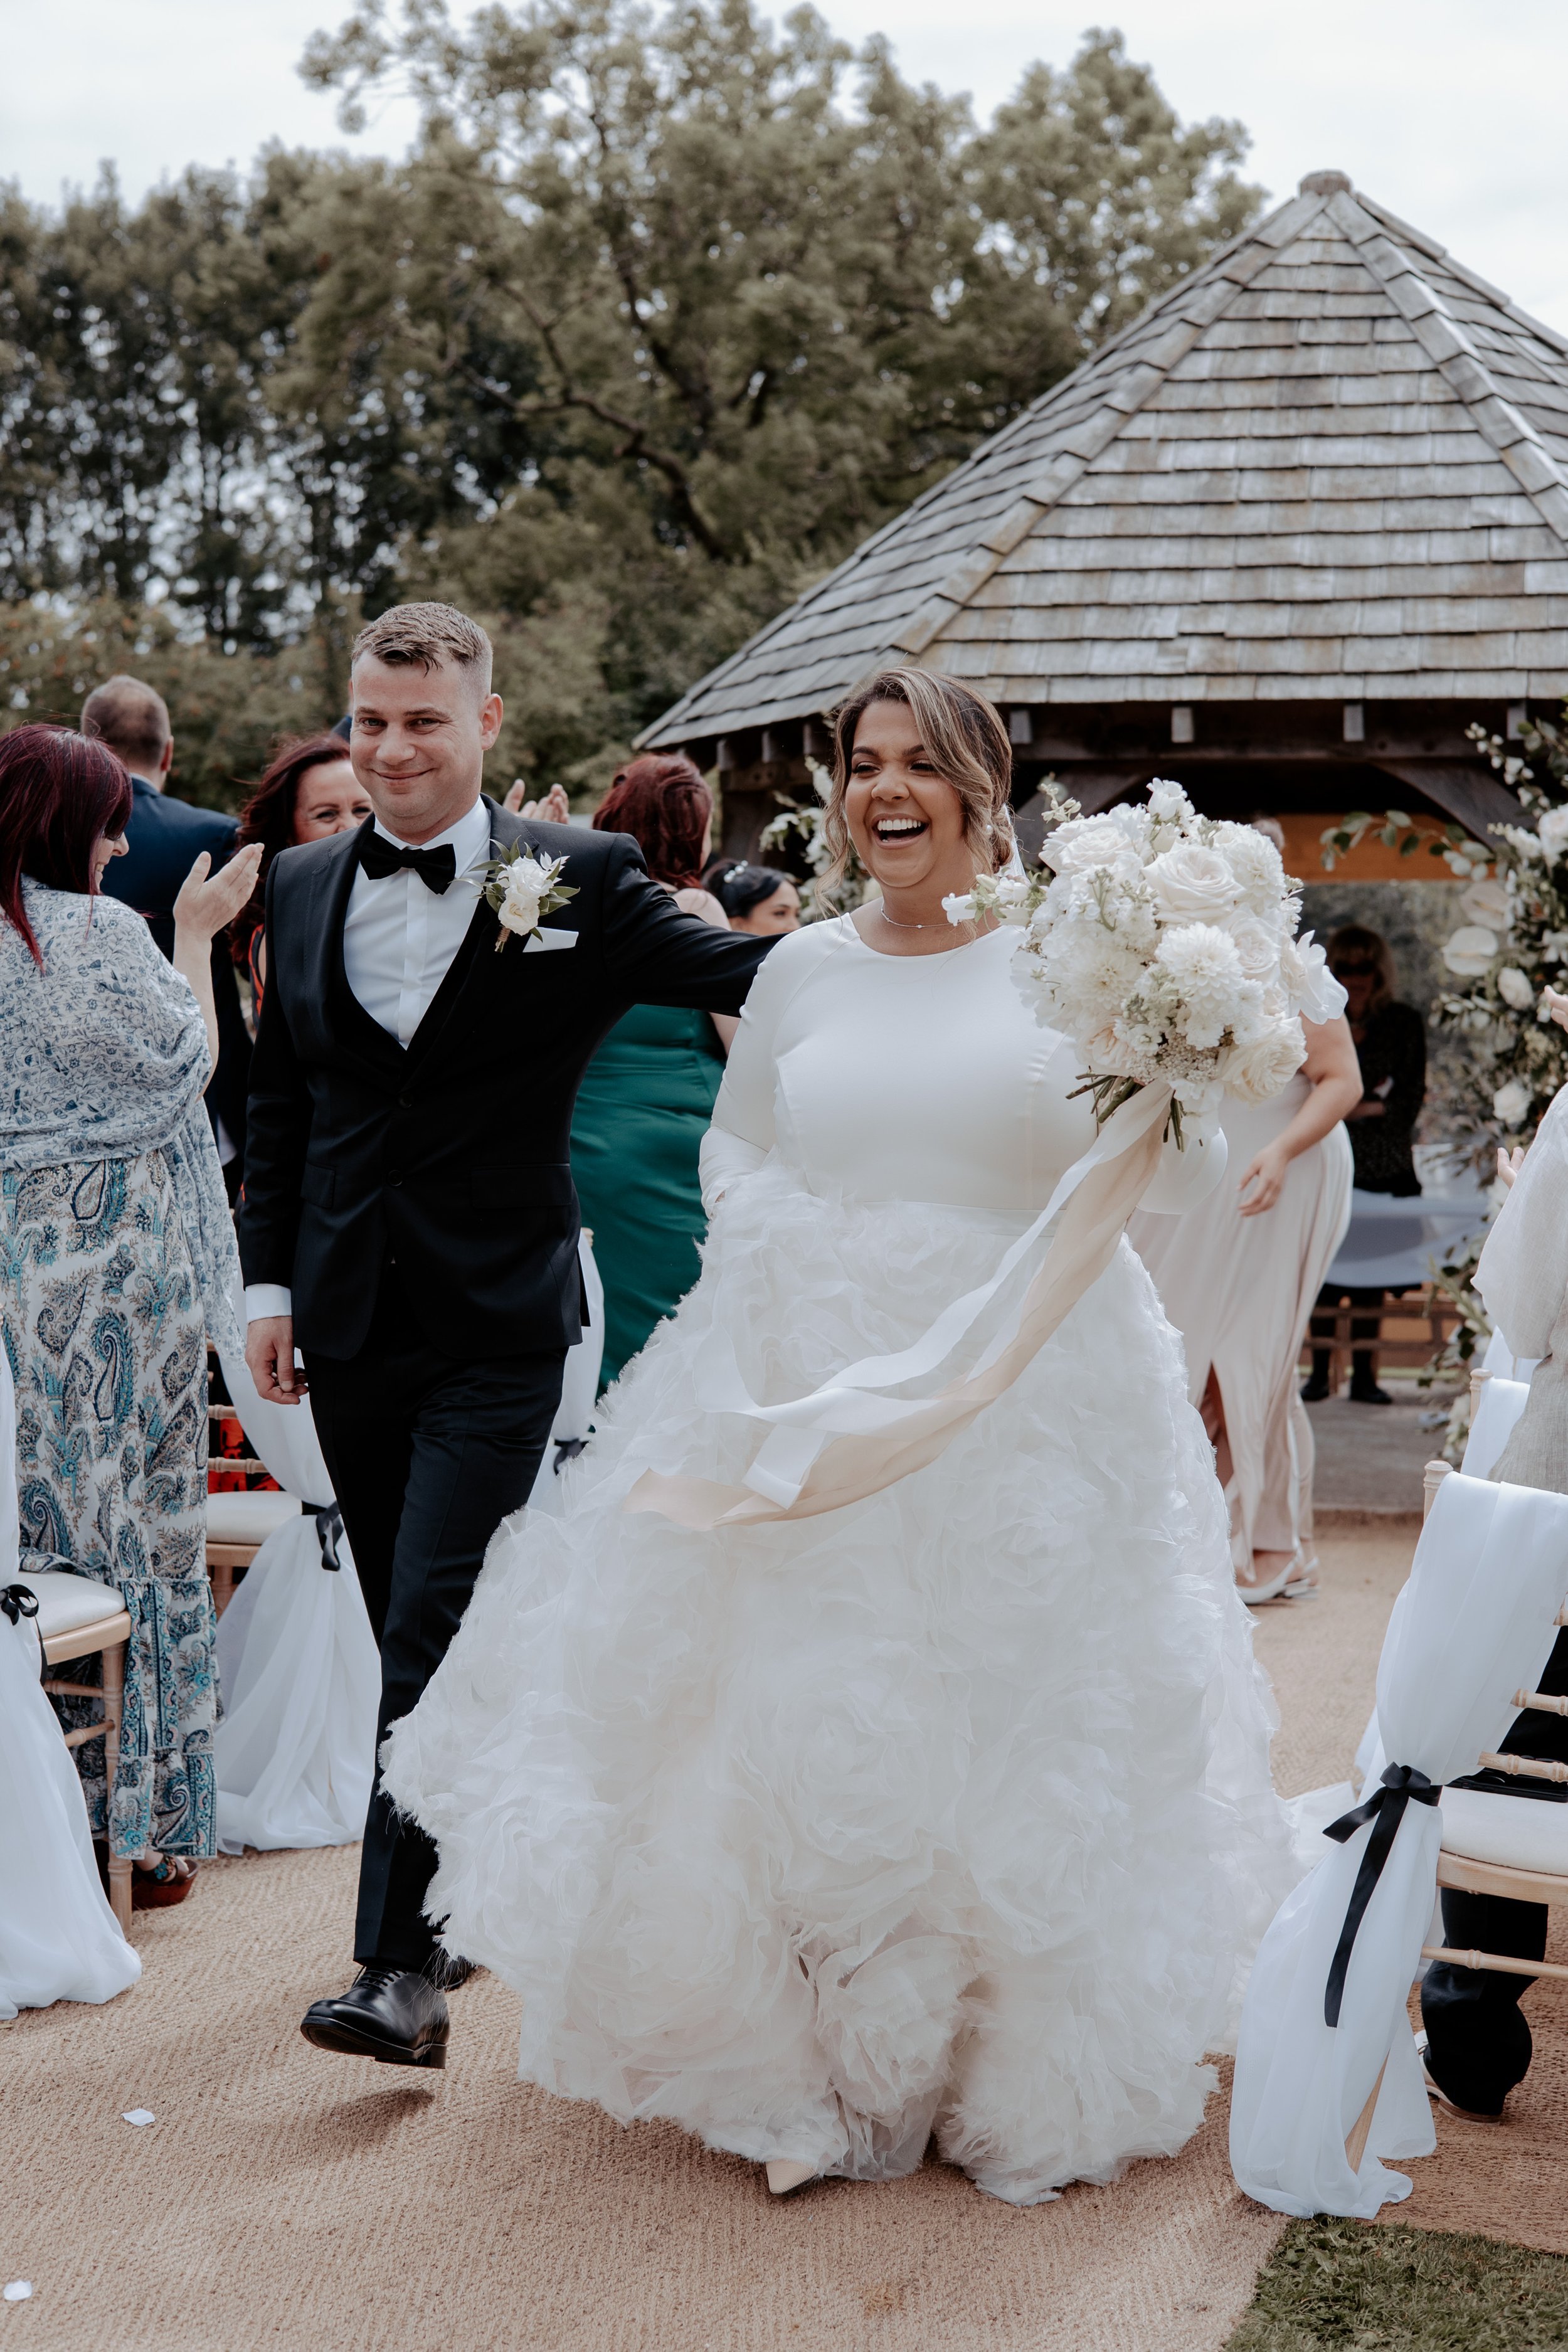 Beautiful bride Natalie wore the Ruffle Rose skirt and a bespoke Gordon top | Wedding dress by Halfpenny London